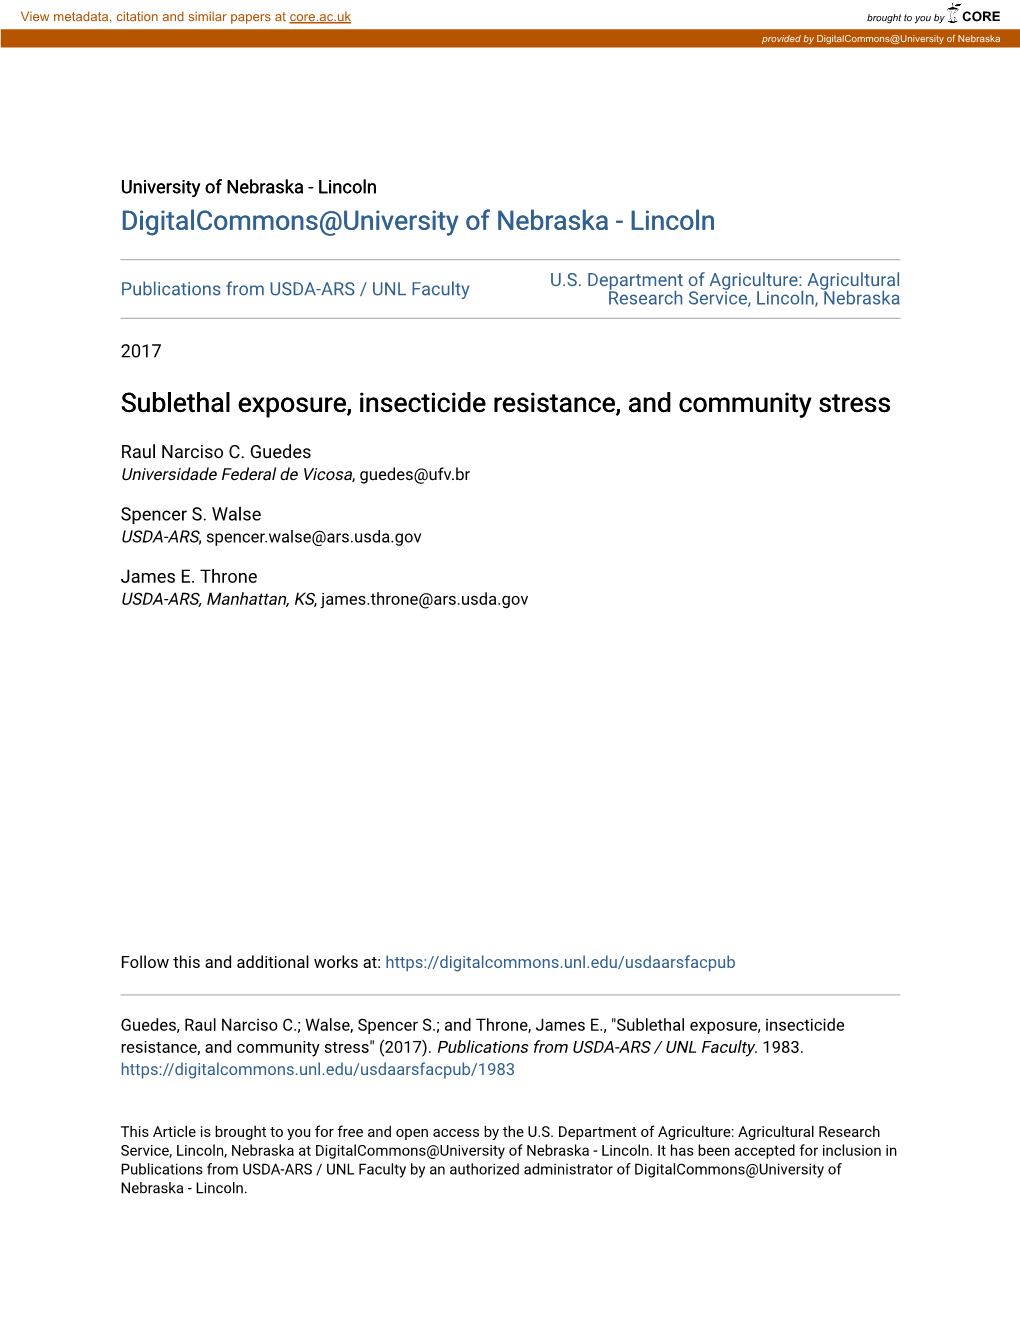 Sublethal Exposure, Insecticide Resistance, and Community Stress